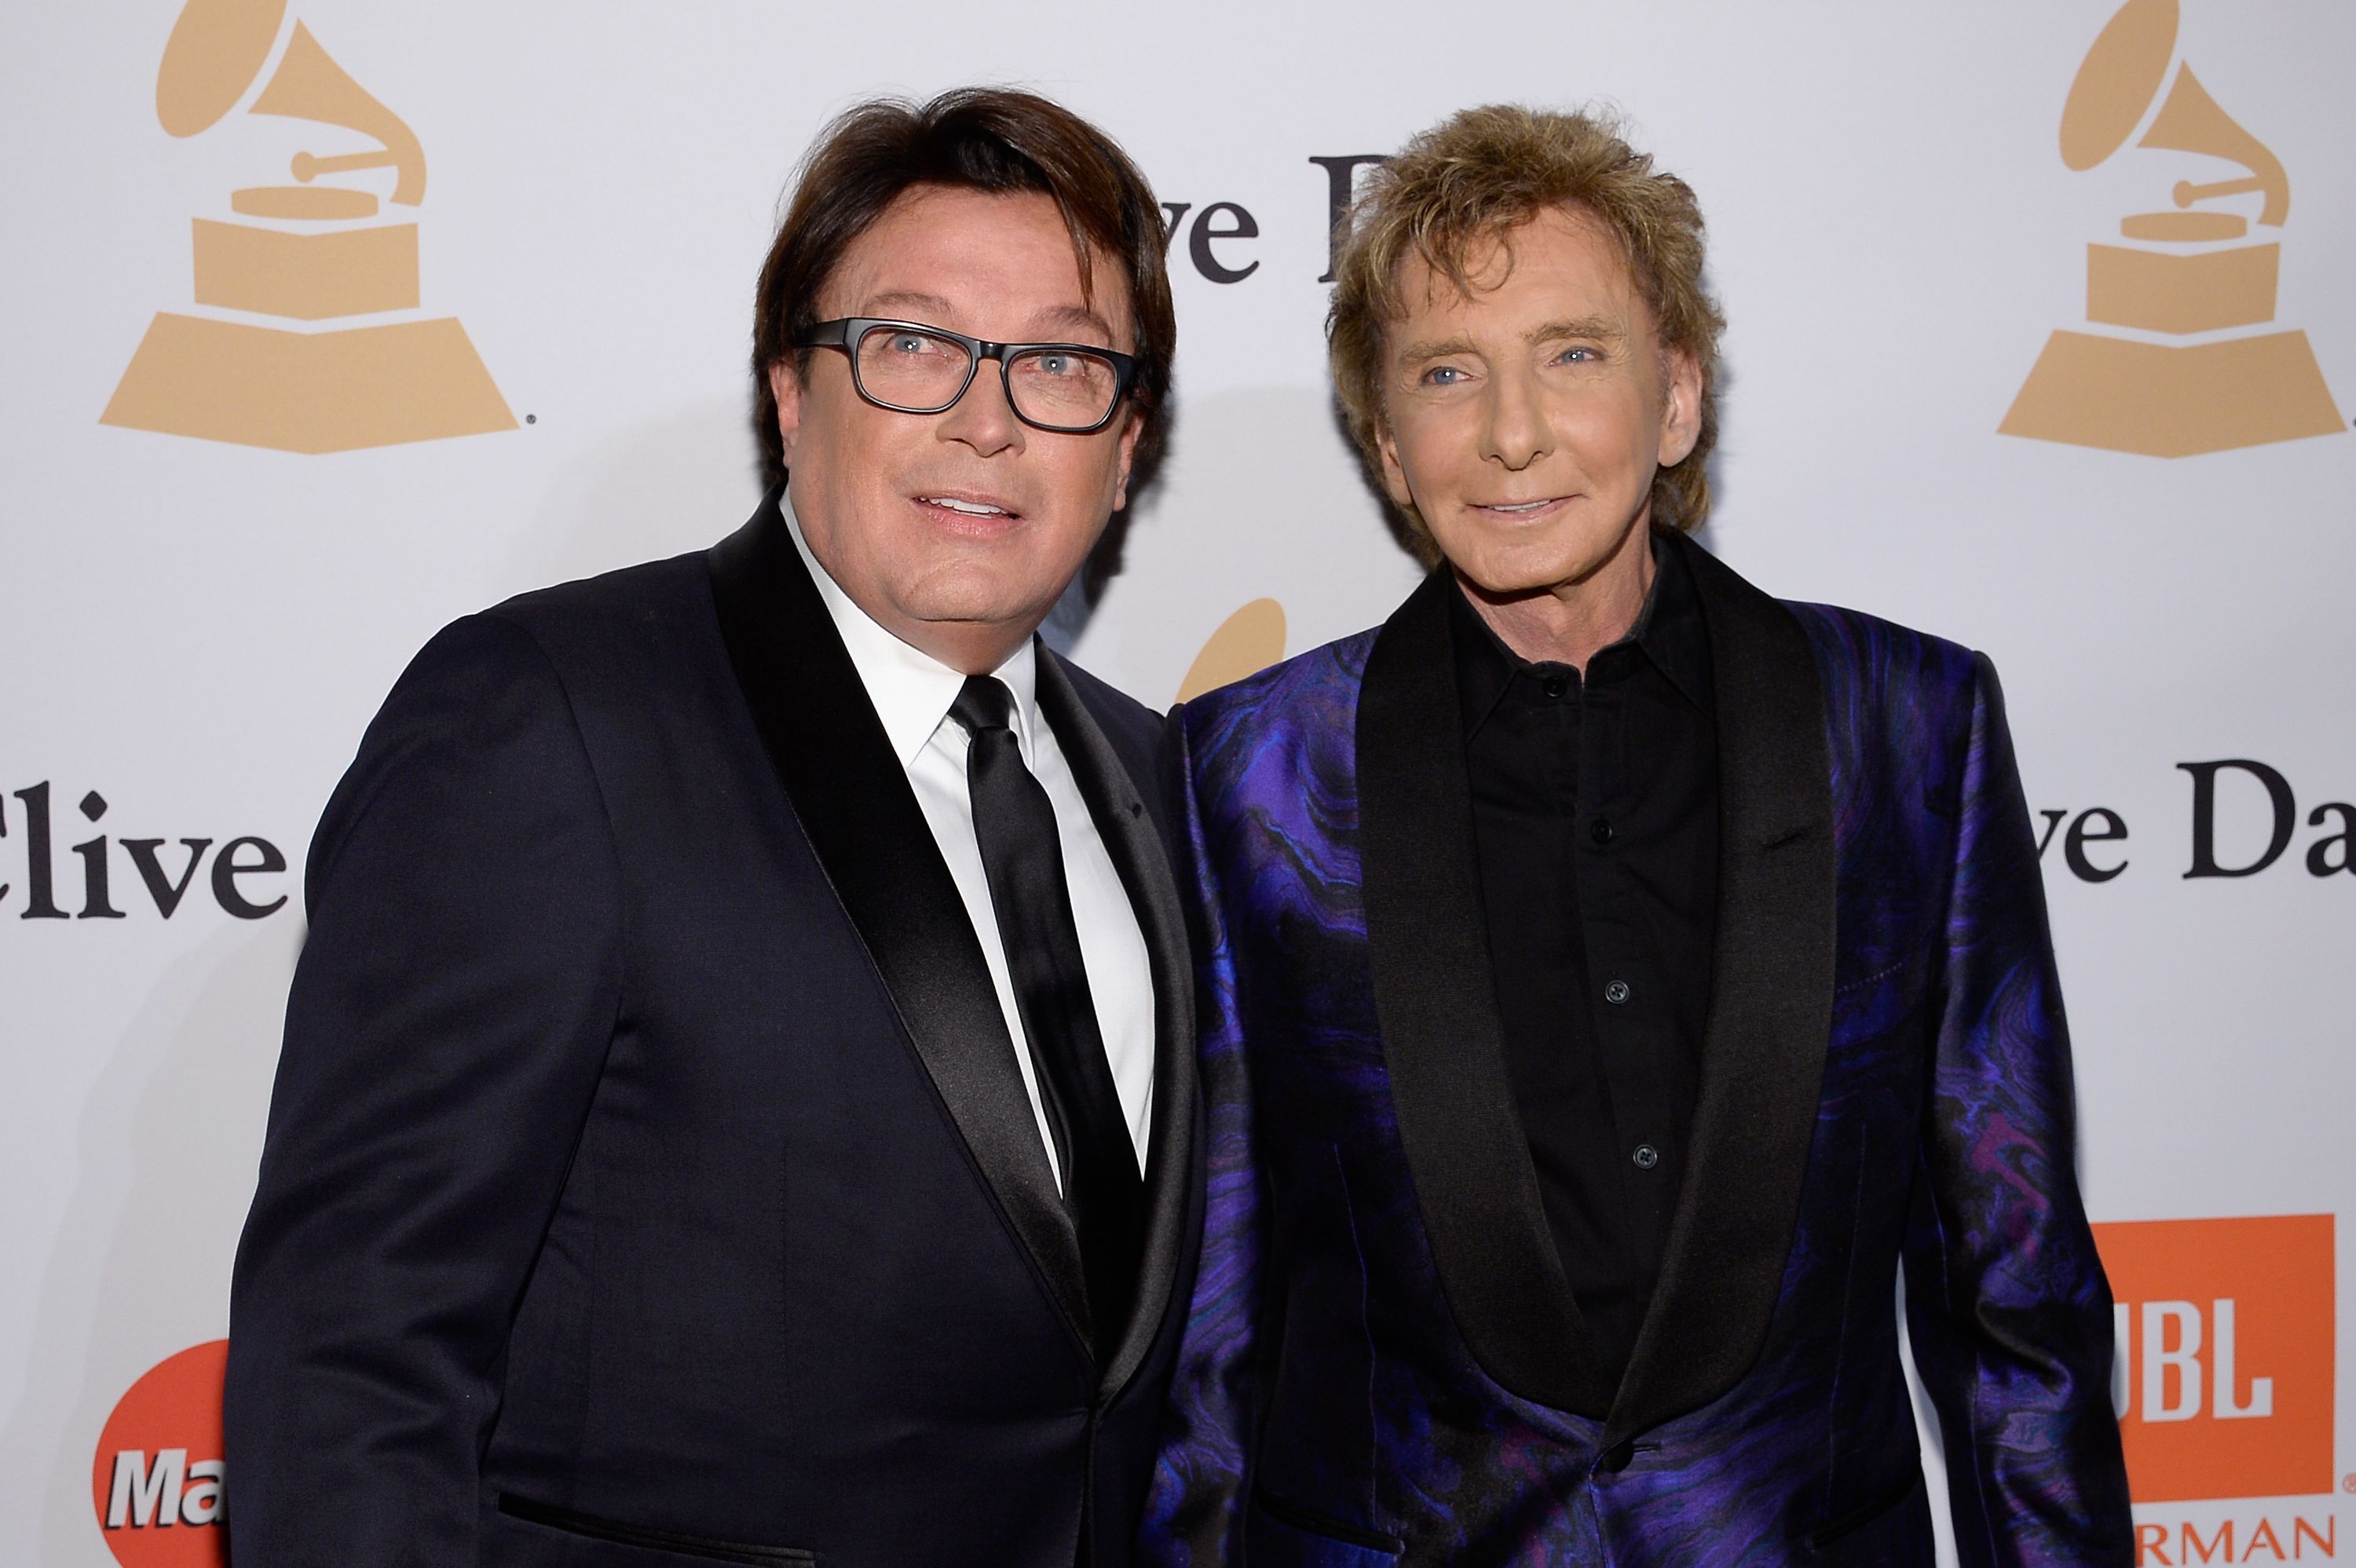 Garry Kief and Barry Manilow attend the 2016 Pre-GRAMMY Gala on February 15, 2016. | Source: Getty Images